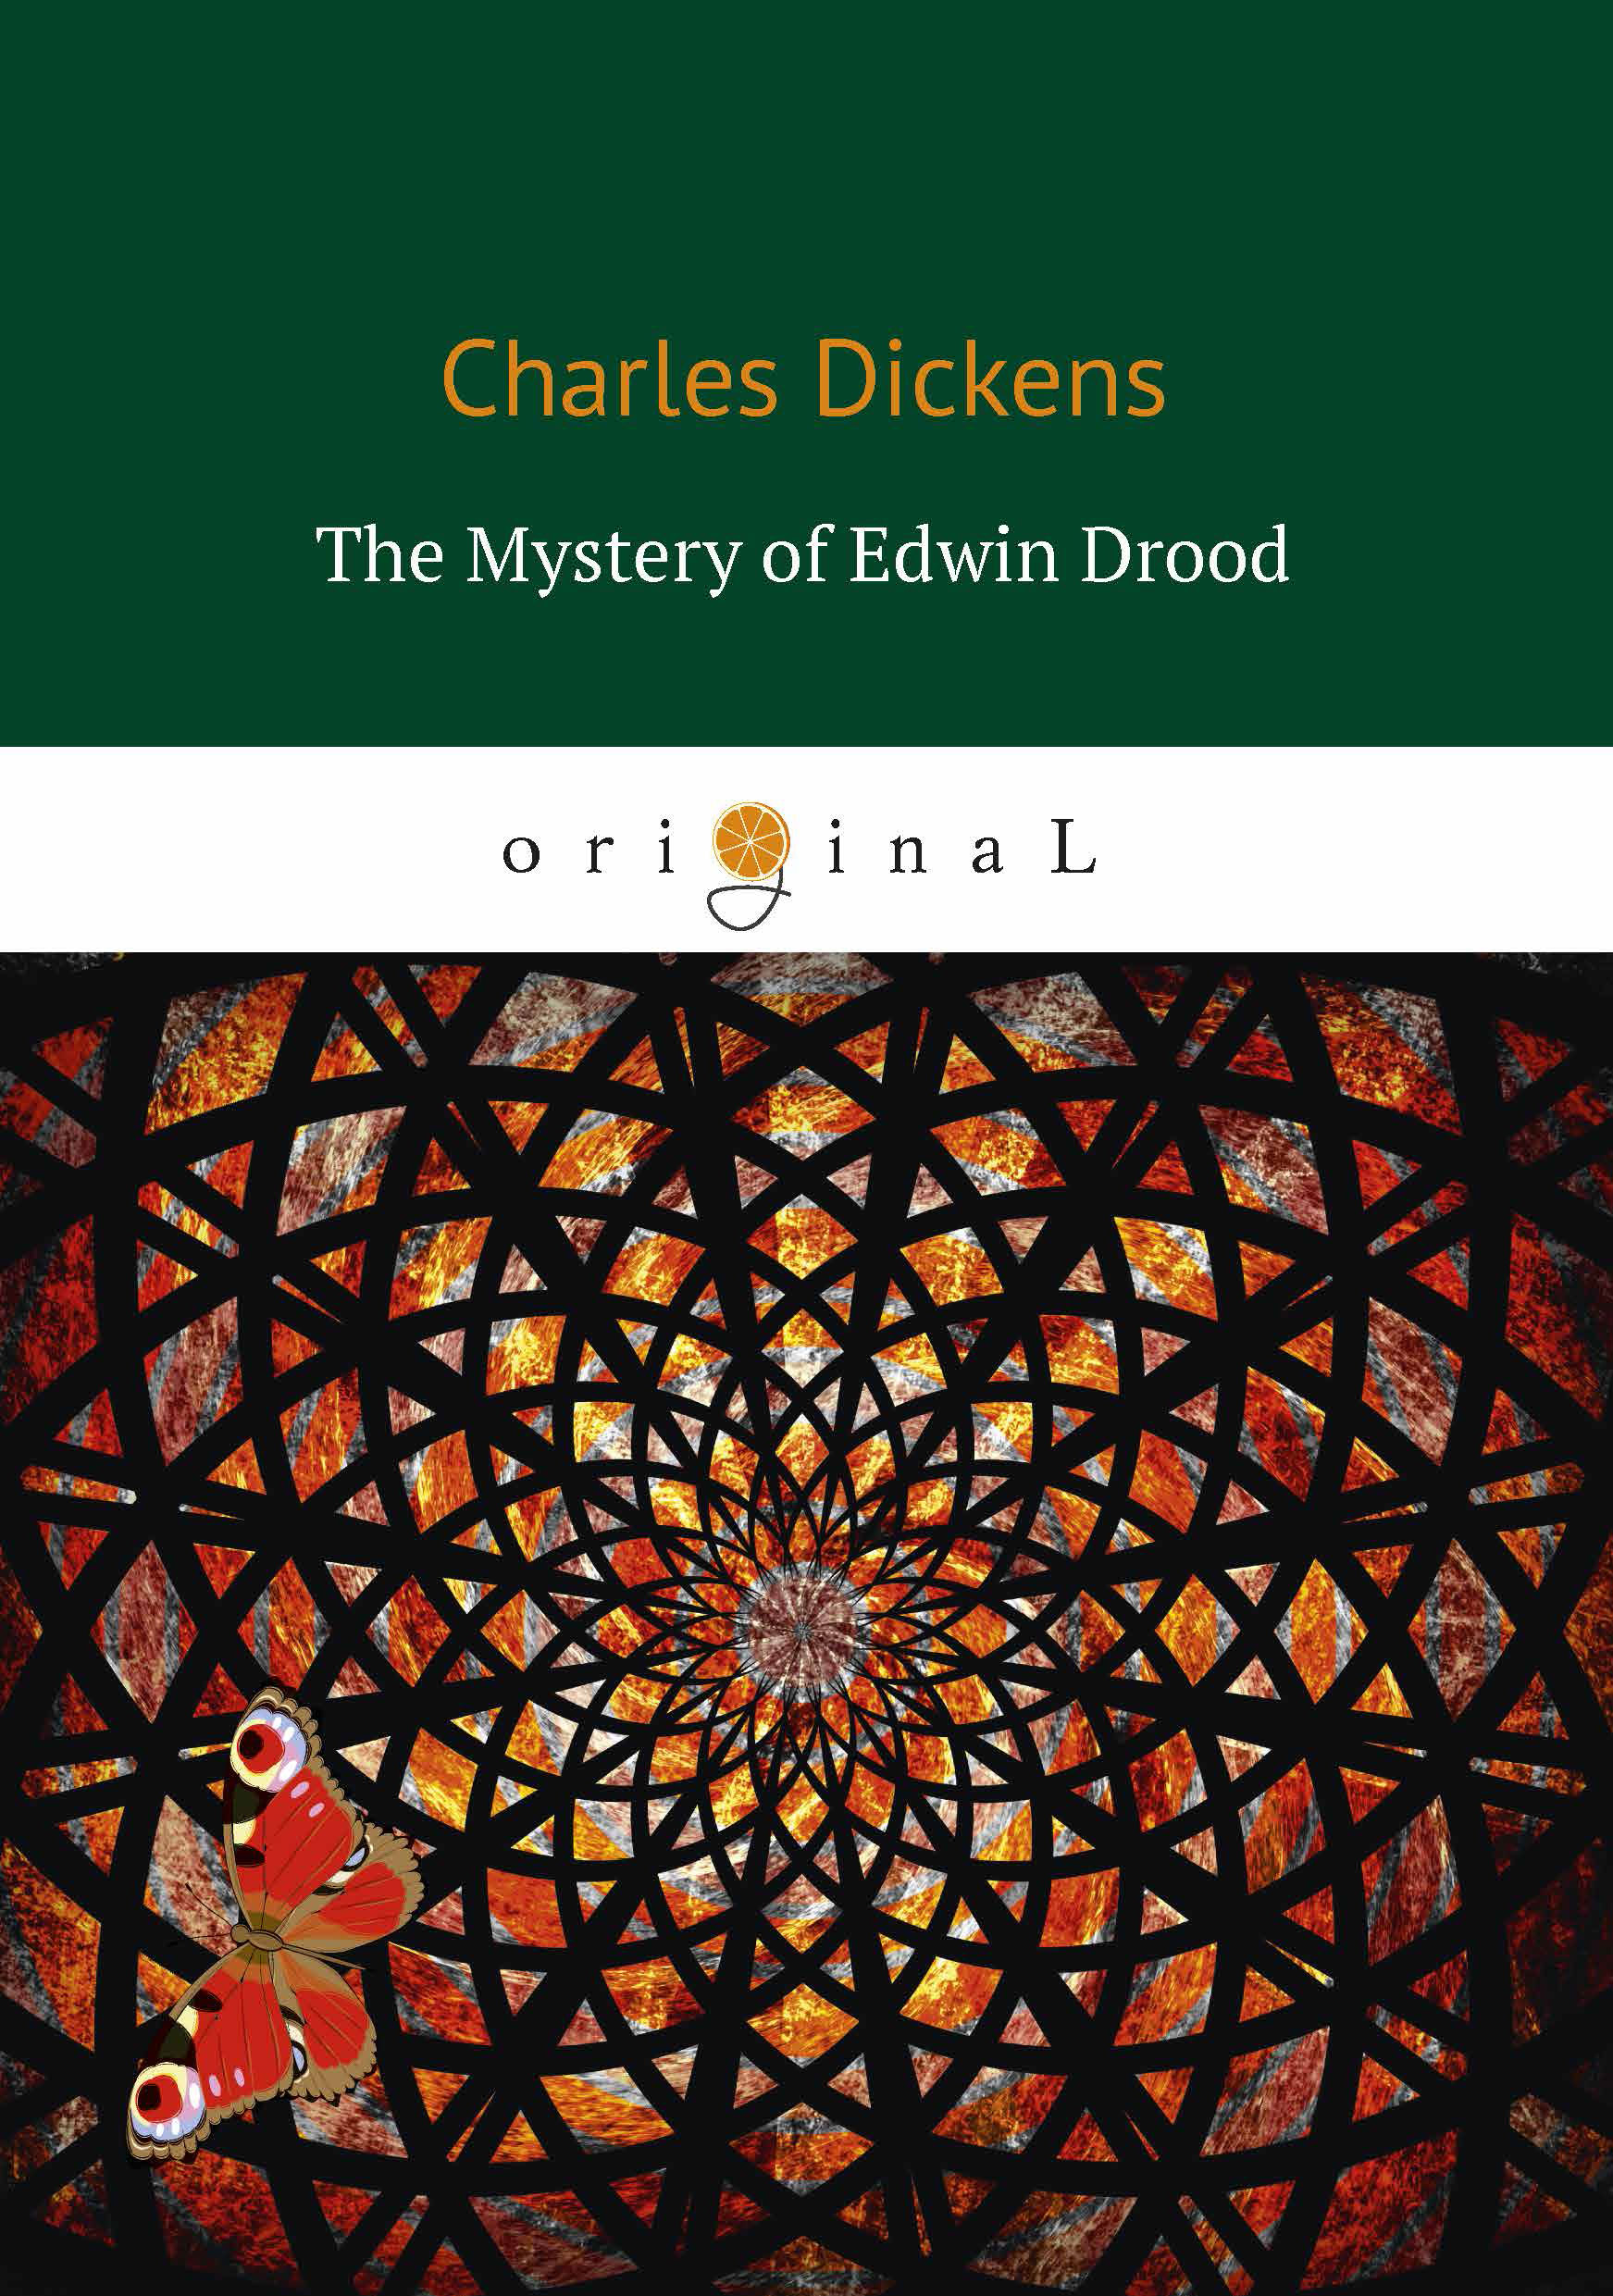 The Mystery of Edwin Drood. Dickens C.